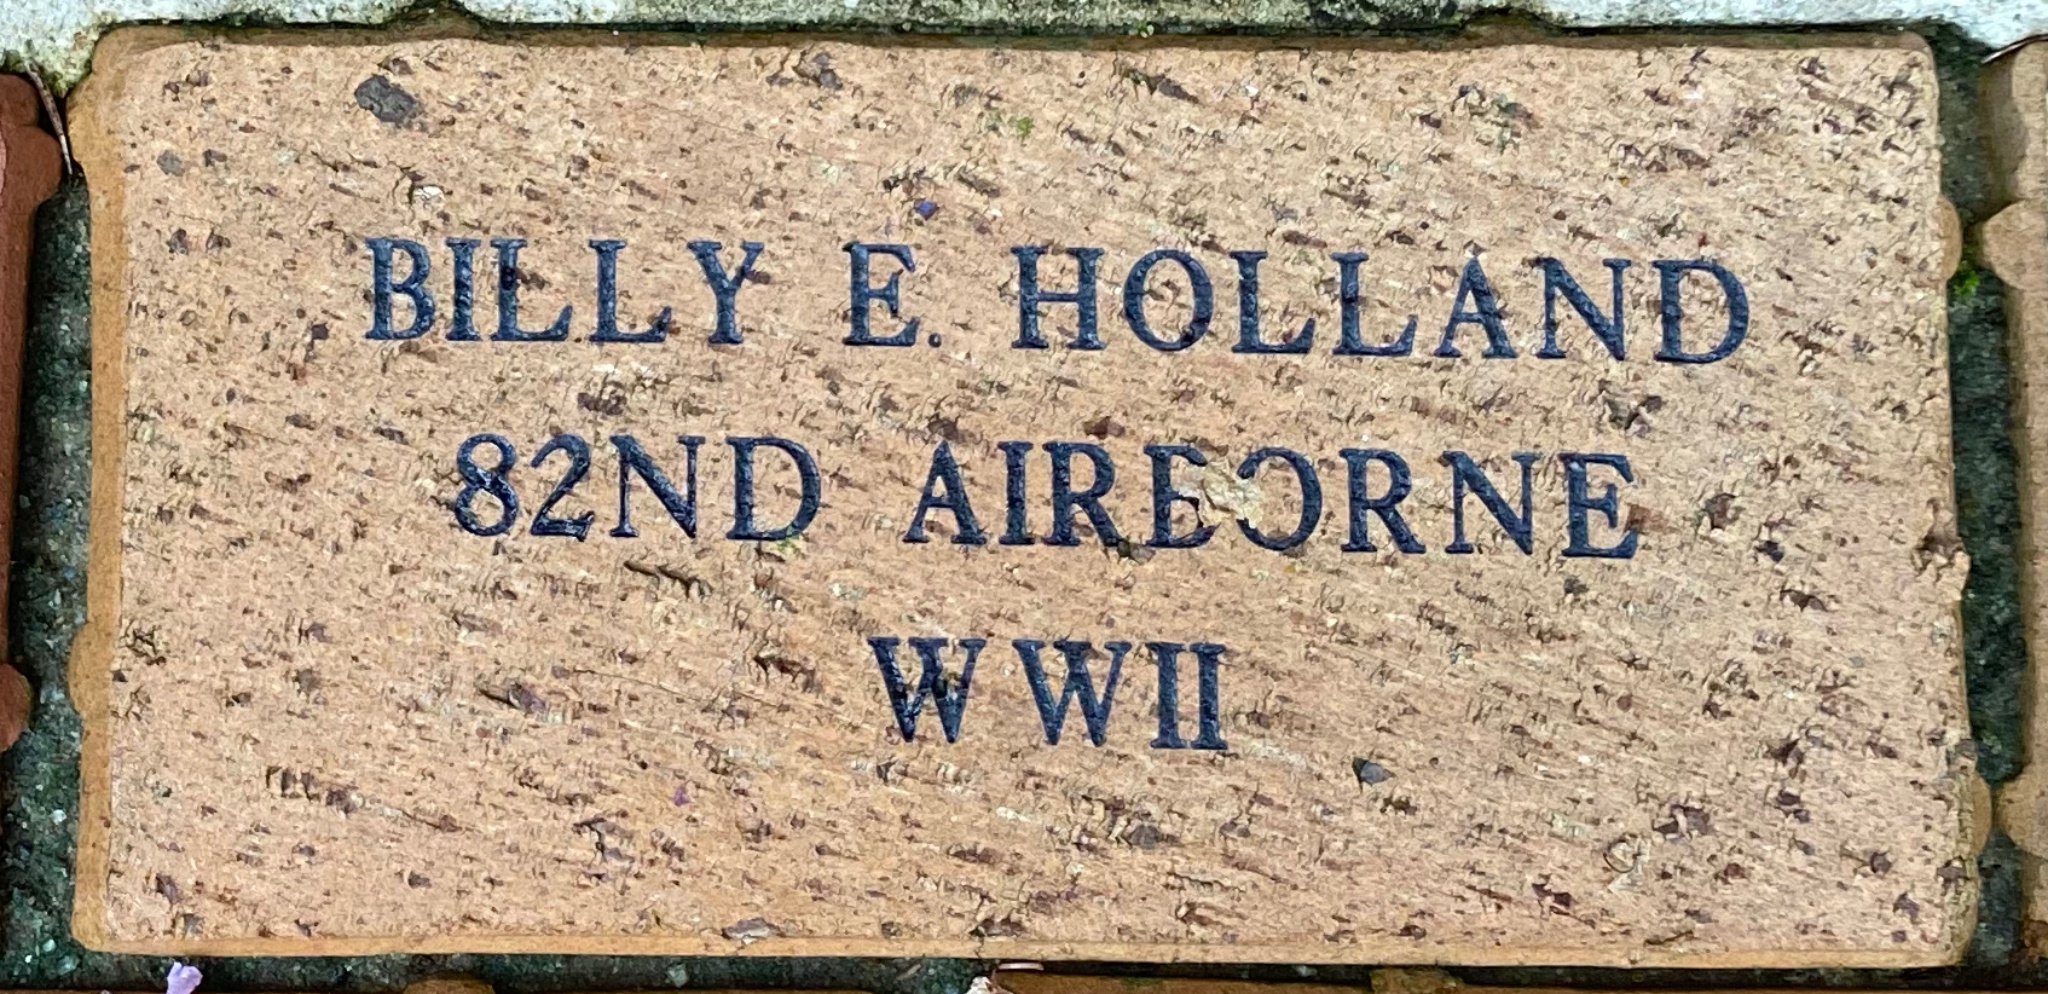 BILLY E. HOLLAND 82ND AIRBORNE WWII